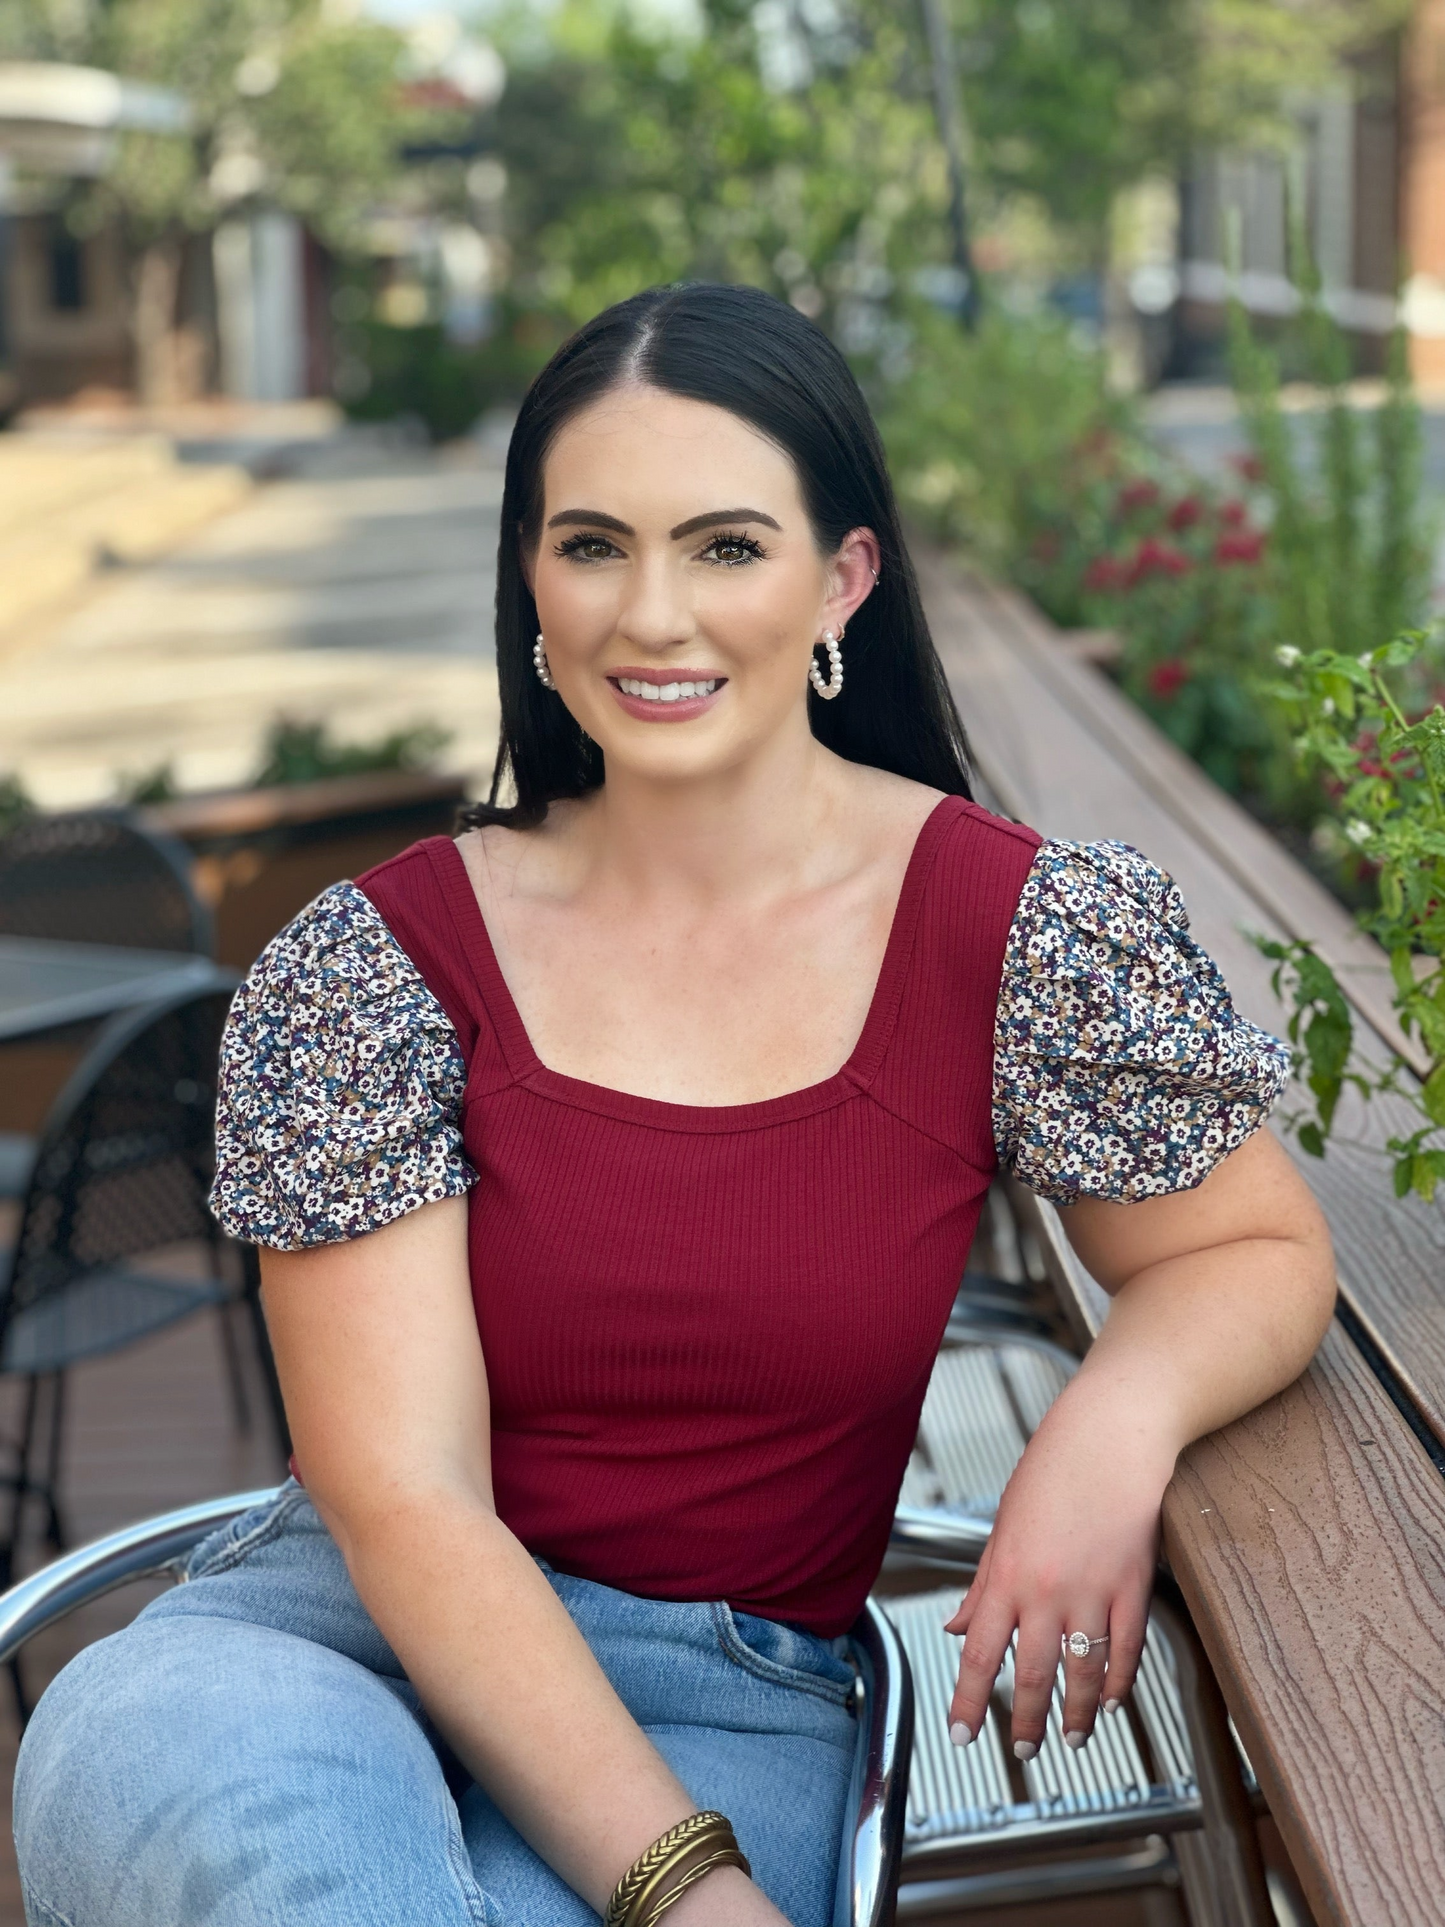 Make a fashion statement with the Abigail top by Washco Apparel! This adorable cropped top has floral sleeves and offers a flattering fit. The top hits right at your high waisted jean line, making it fun and flirty!